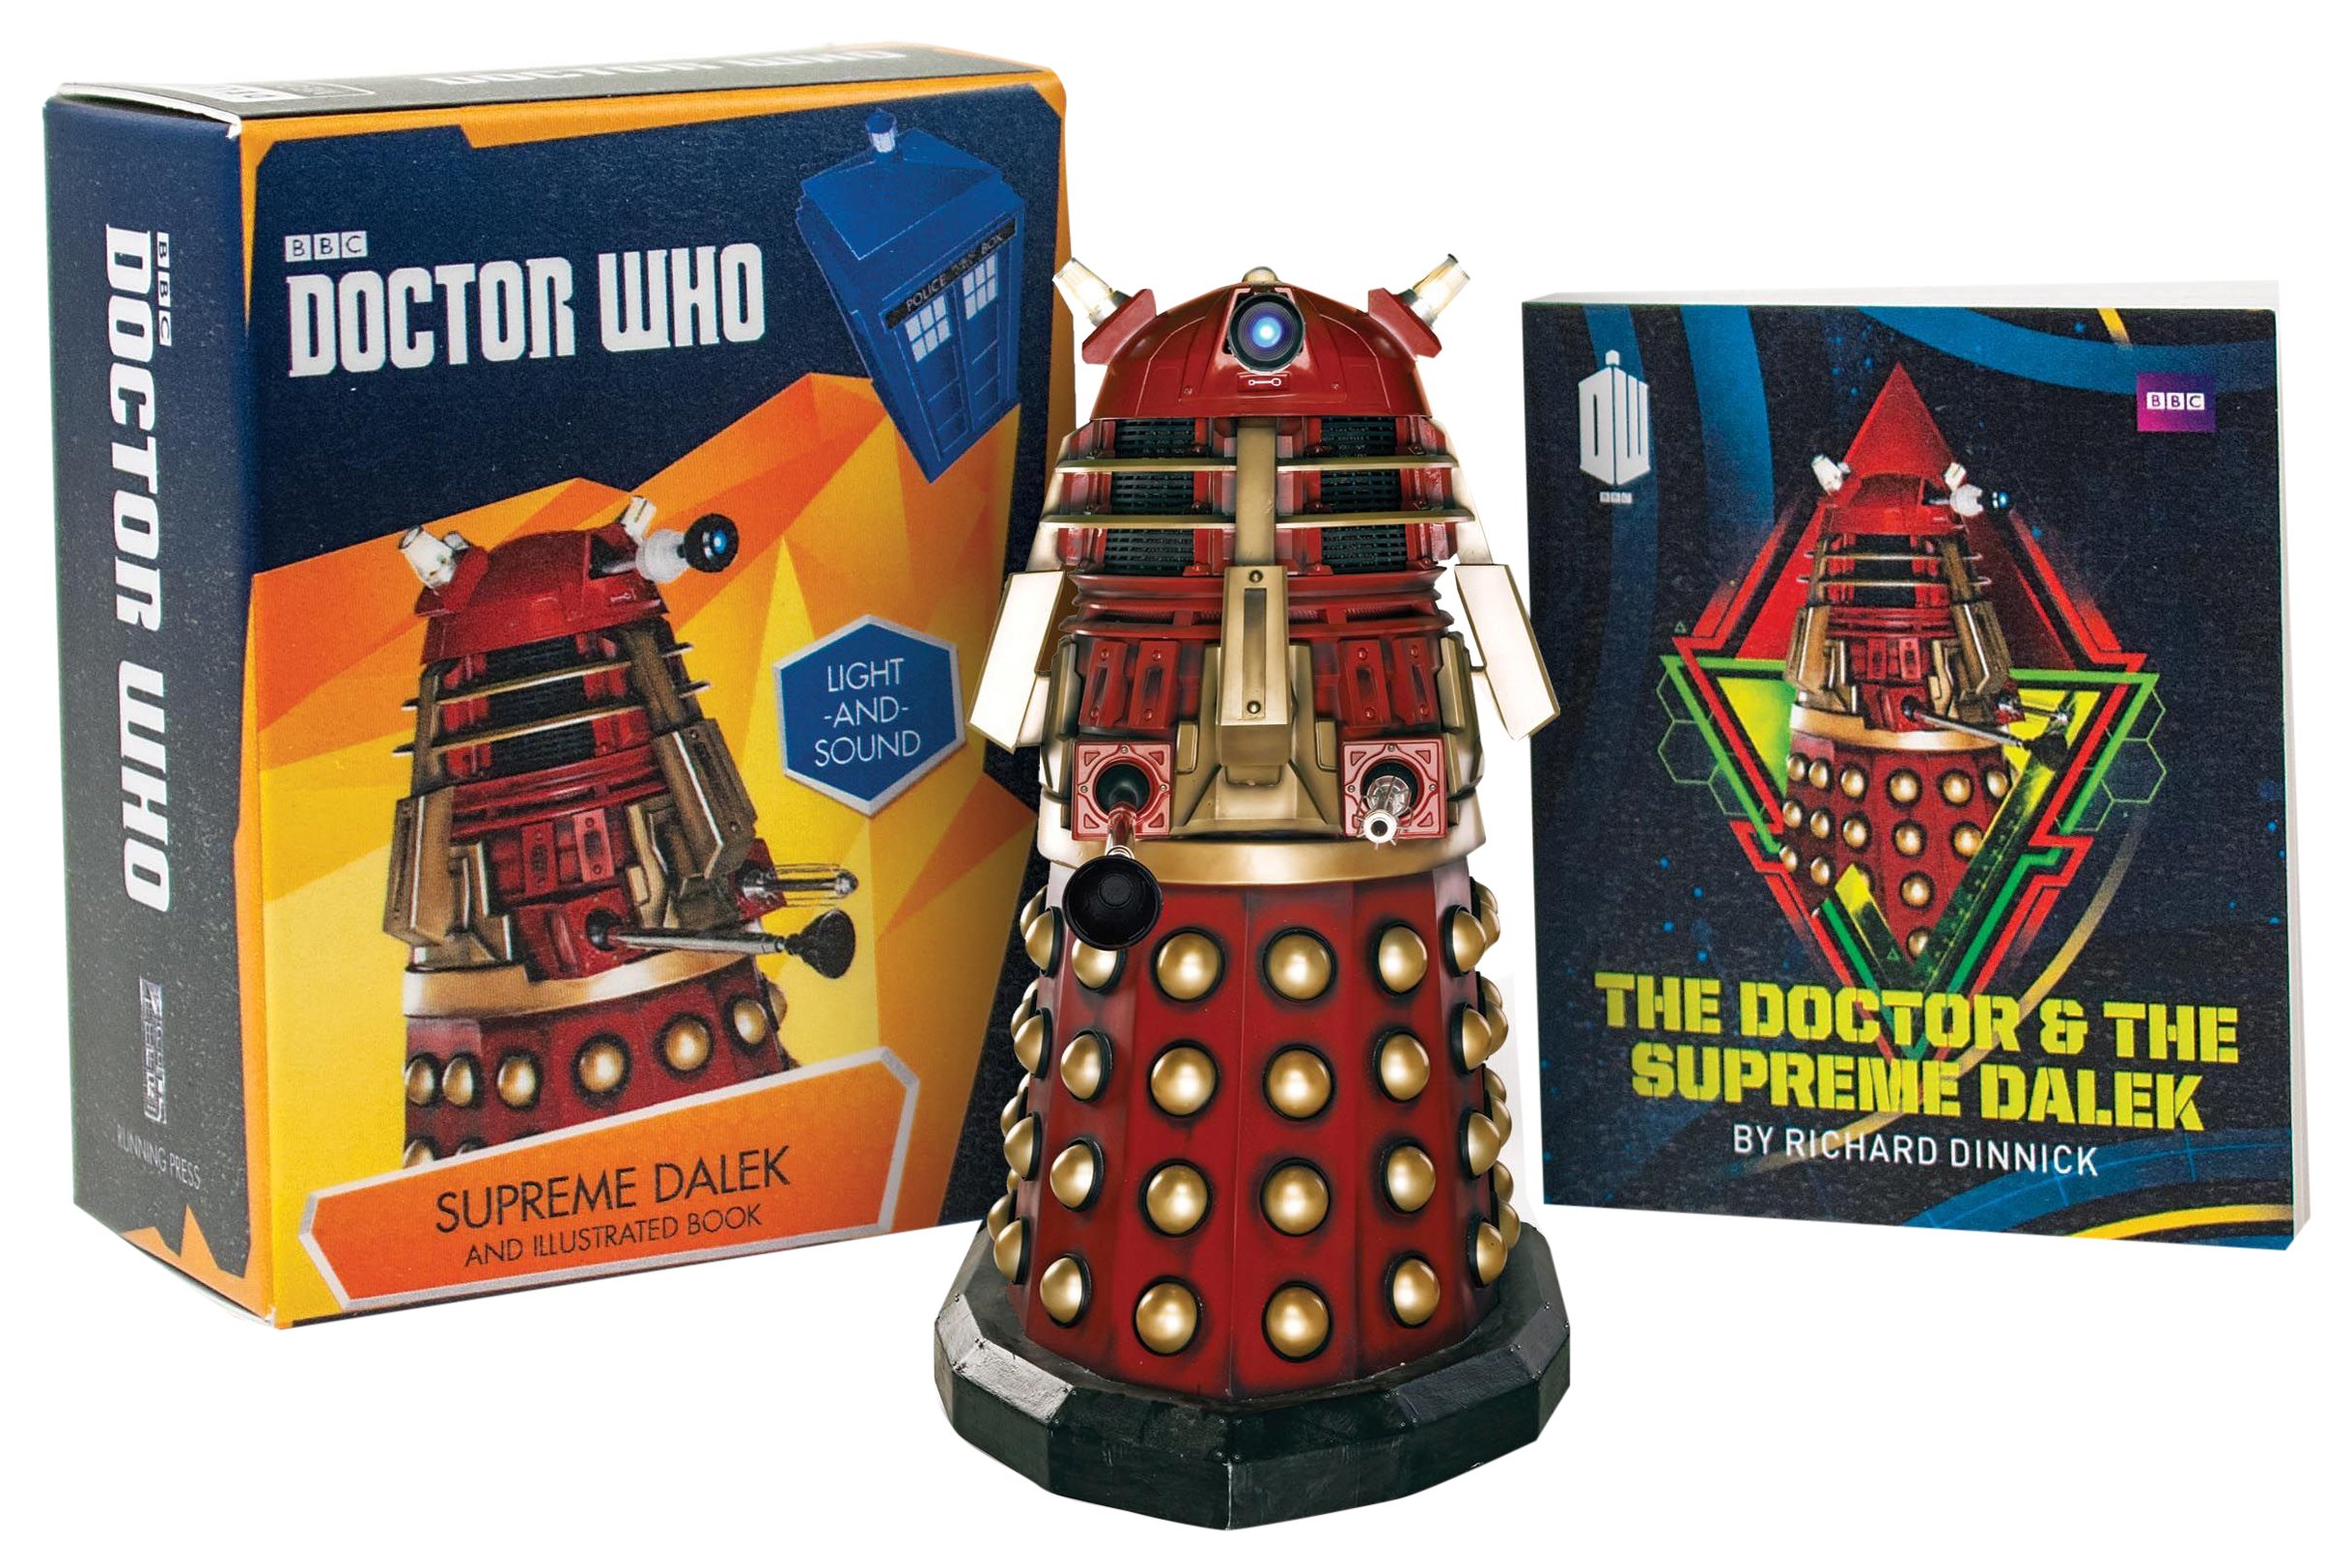 Doctor Who - Supreme Dalek and Illustrated Book | Richard Dinnick